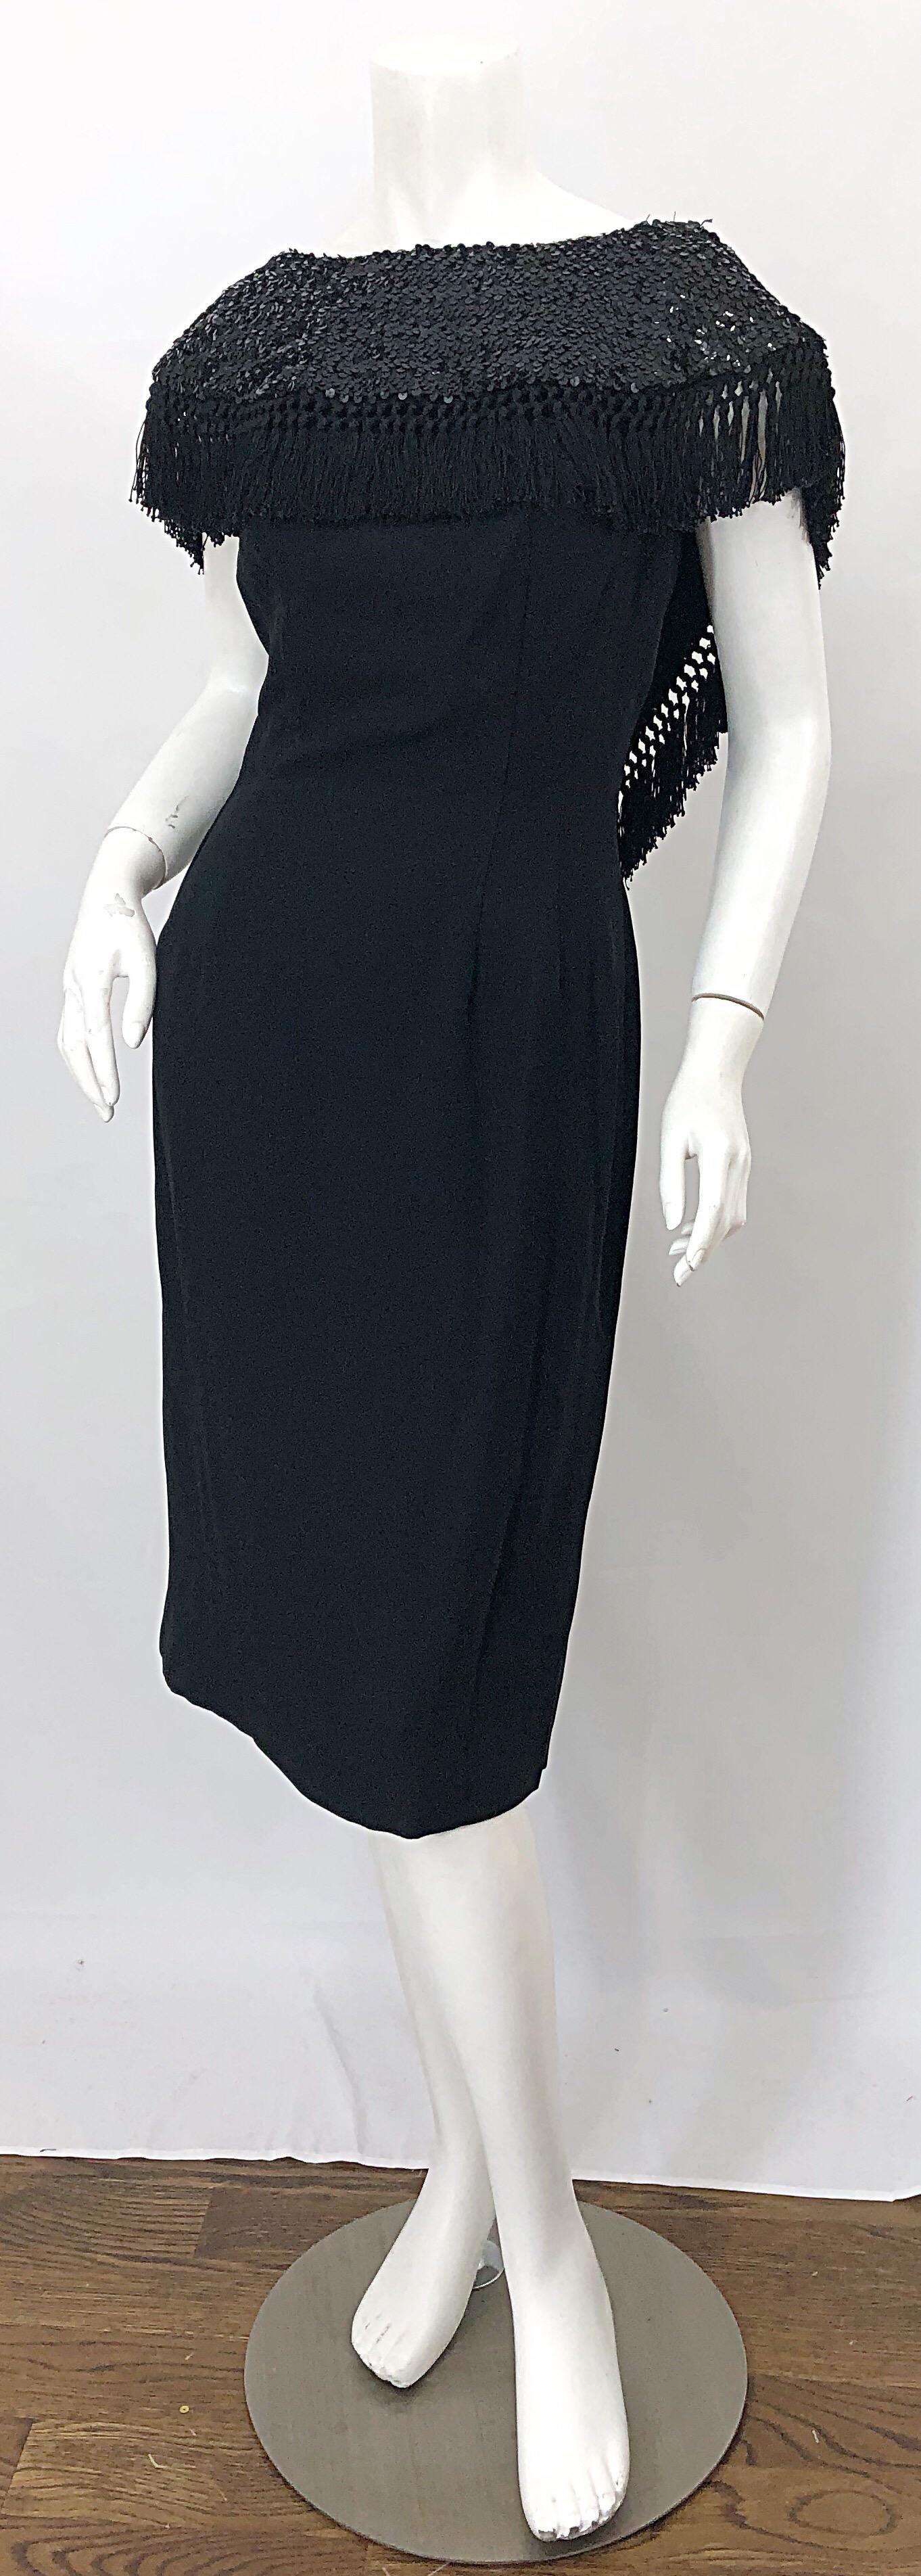 Wonderful 50s black silk crepe dramatic neck sequin wiggle dress! Features a shawl like collar drenched with thousands of hand-sewn black sequins. Dipped low back reveals just the right amount of skin. Full metal zipper up the back with hook-and-eye